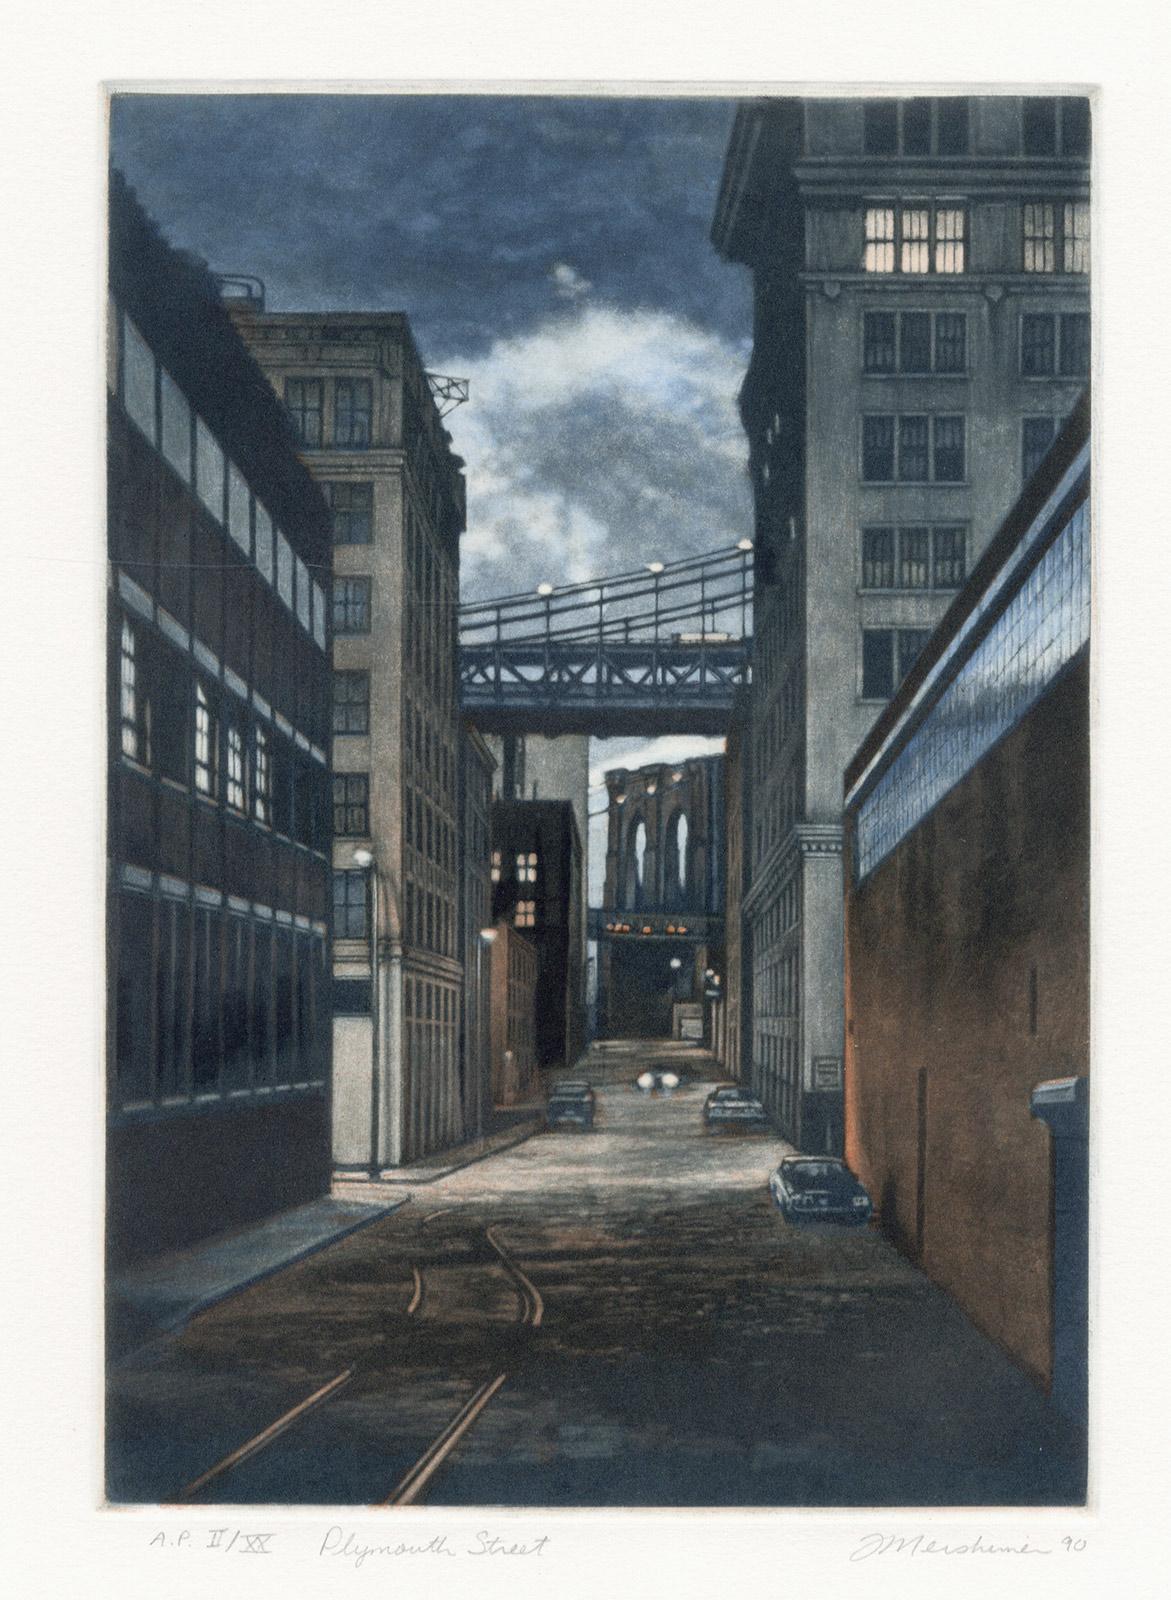 Plymouth Street ( a twilight scene is set in the Brooklyn section of DUMBO) - Print by Frederick Mershimer